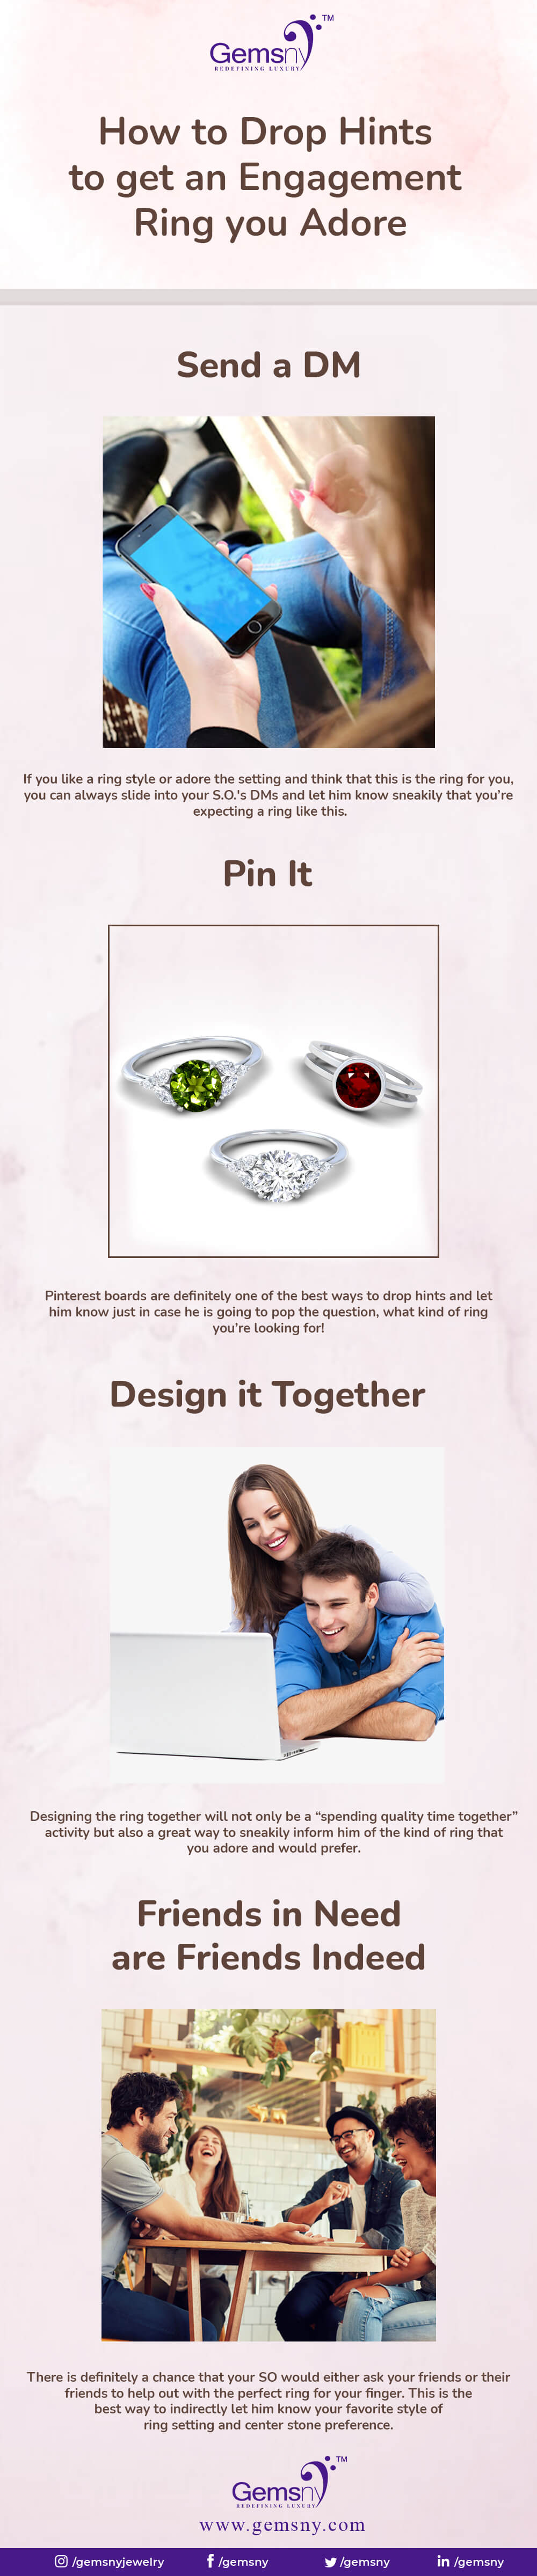 Get an Engagement Ring You Adore